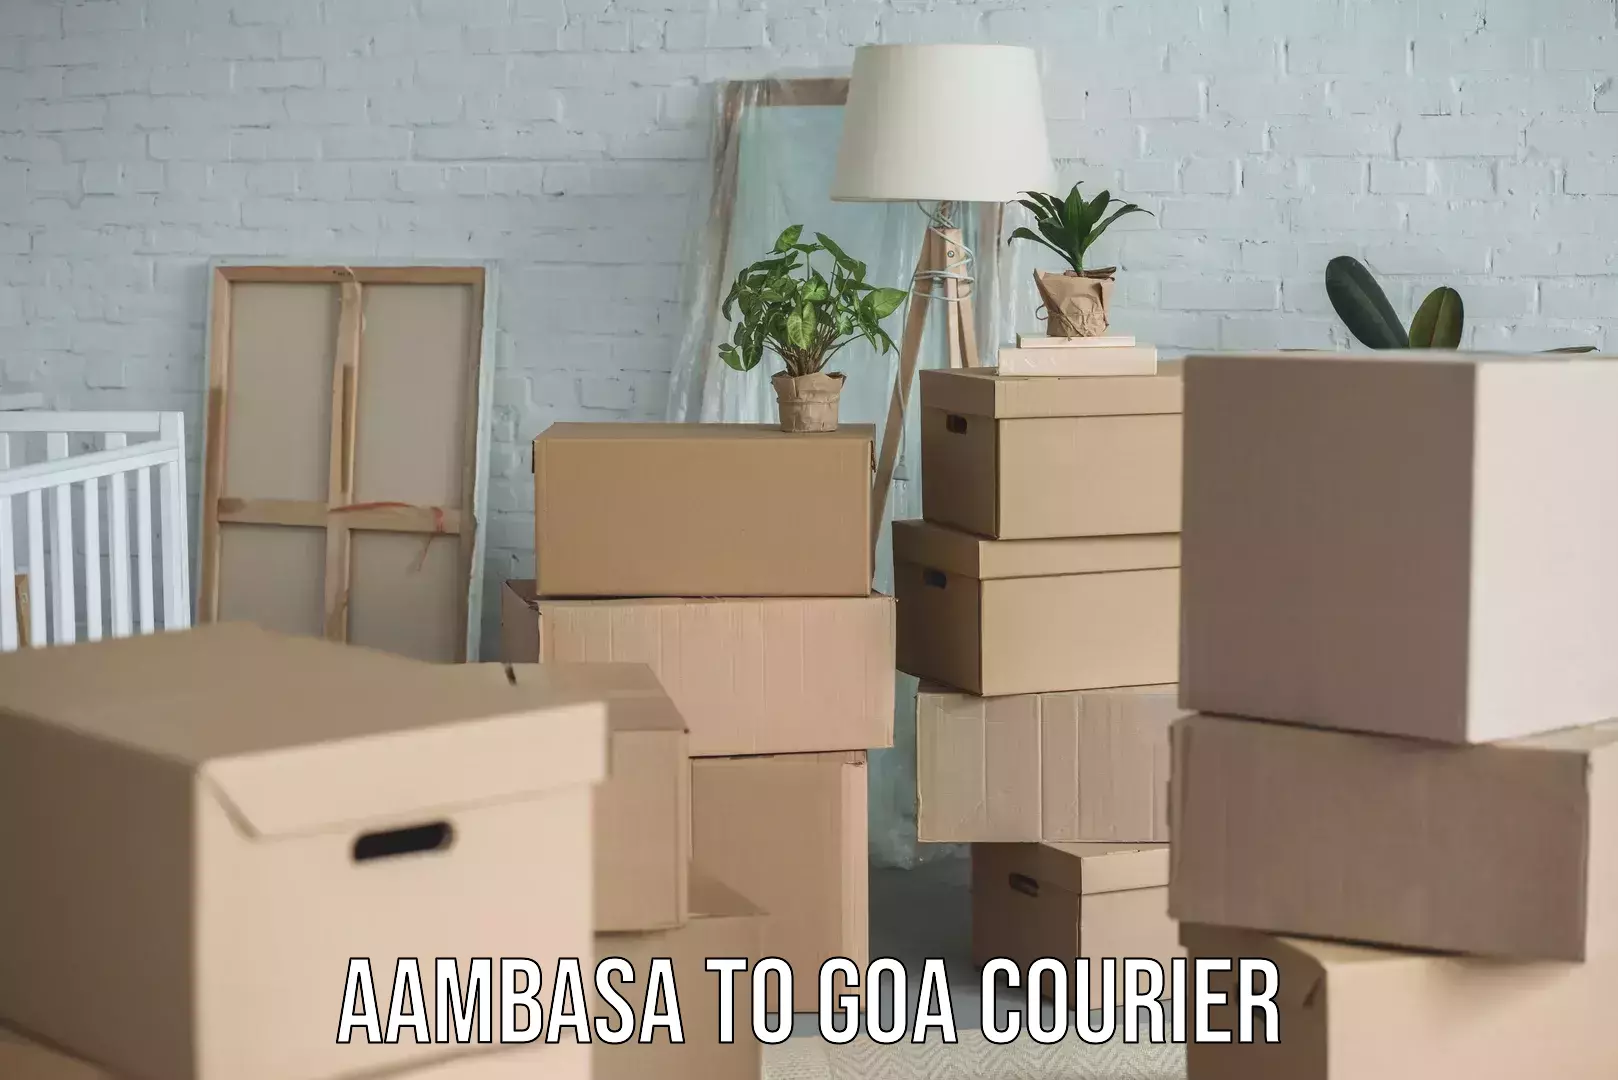 Automated parcel services Aambasa to Goa